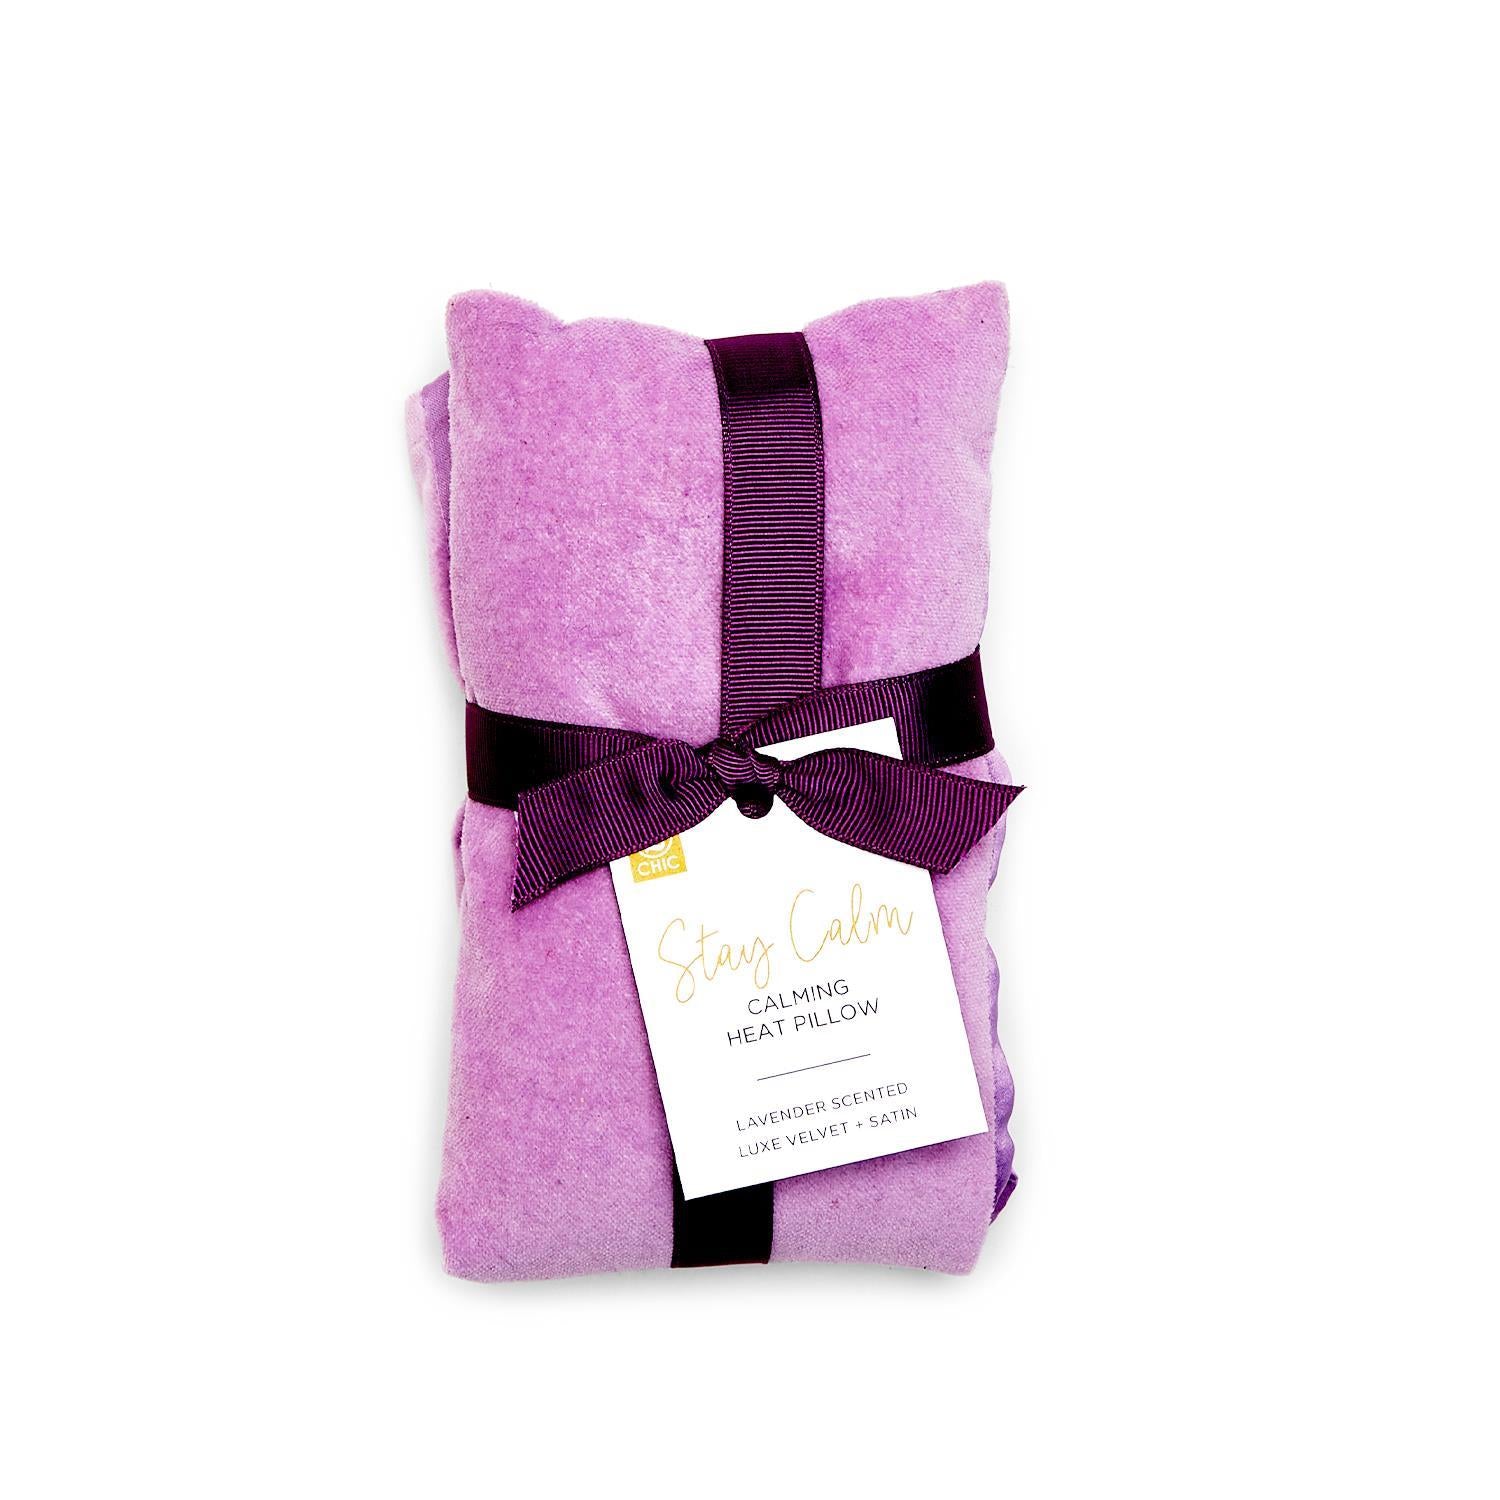 Luxe Velvet and Satin Lavender Scented Calming Heat Pillow